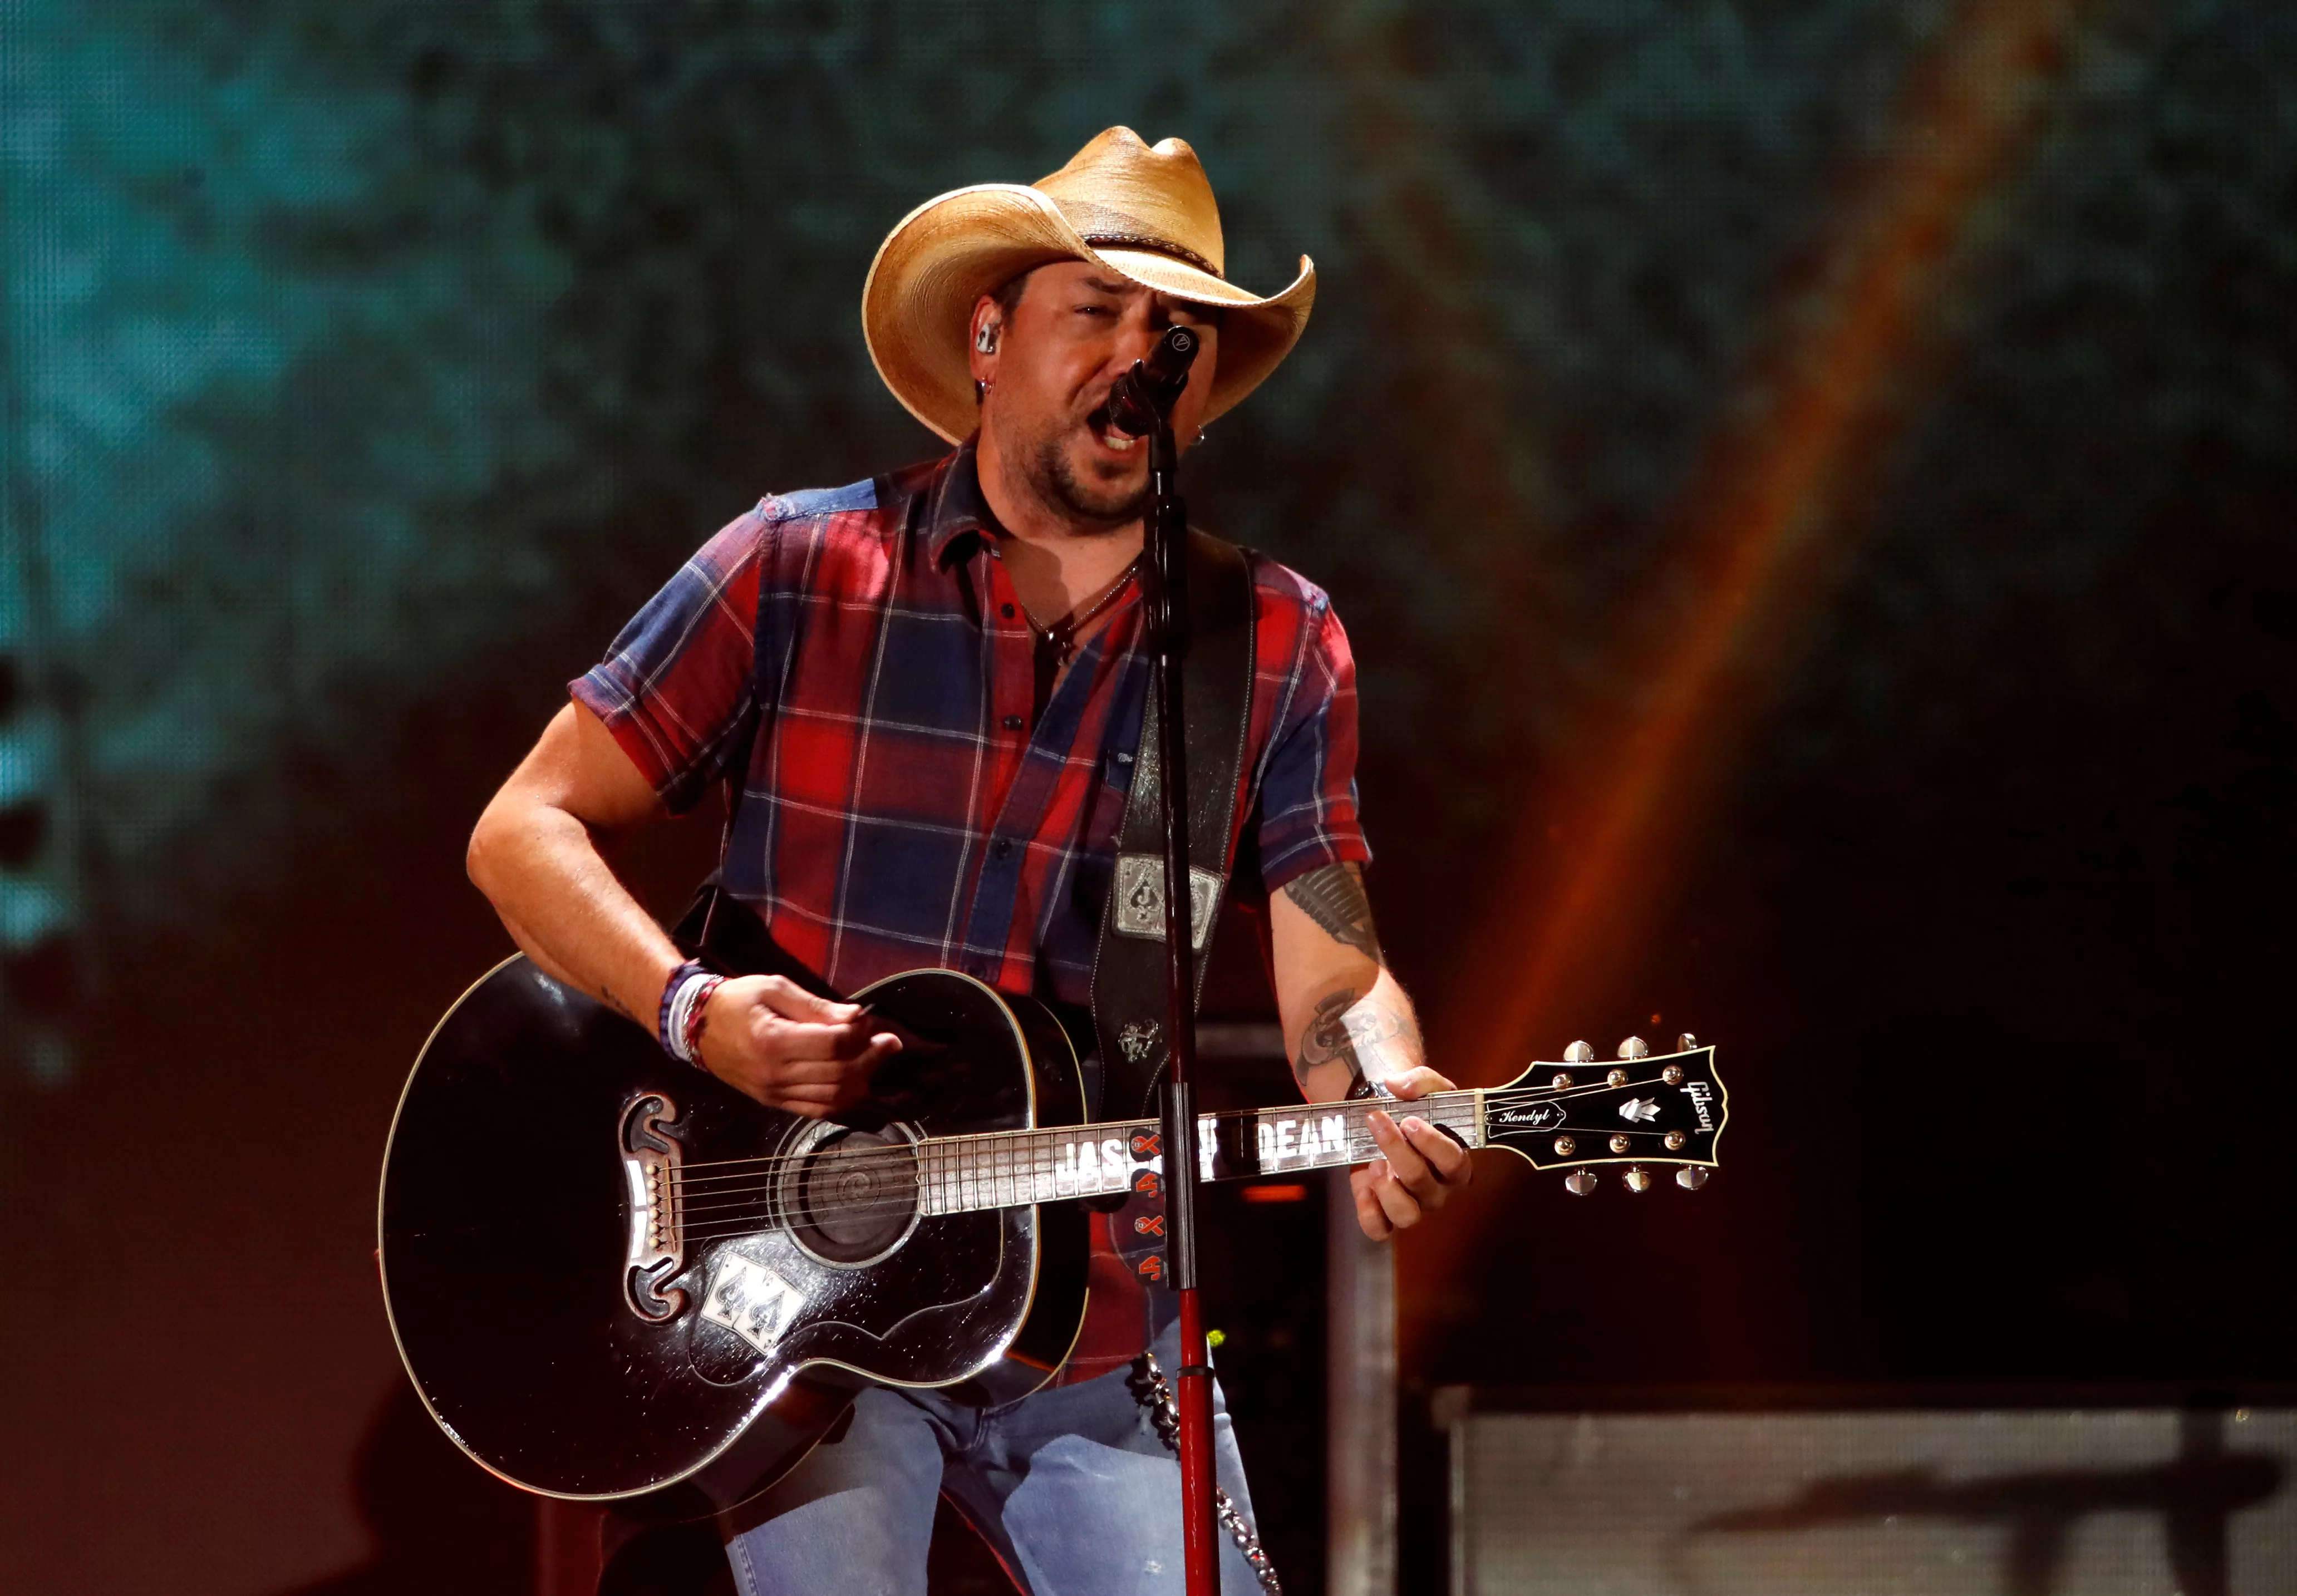 jason-aldean-performs-during-the-iheartradio-music-festival-at-t-mobile-arena-in-las-vegas